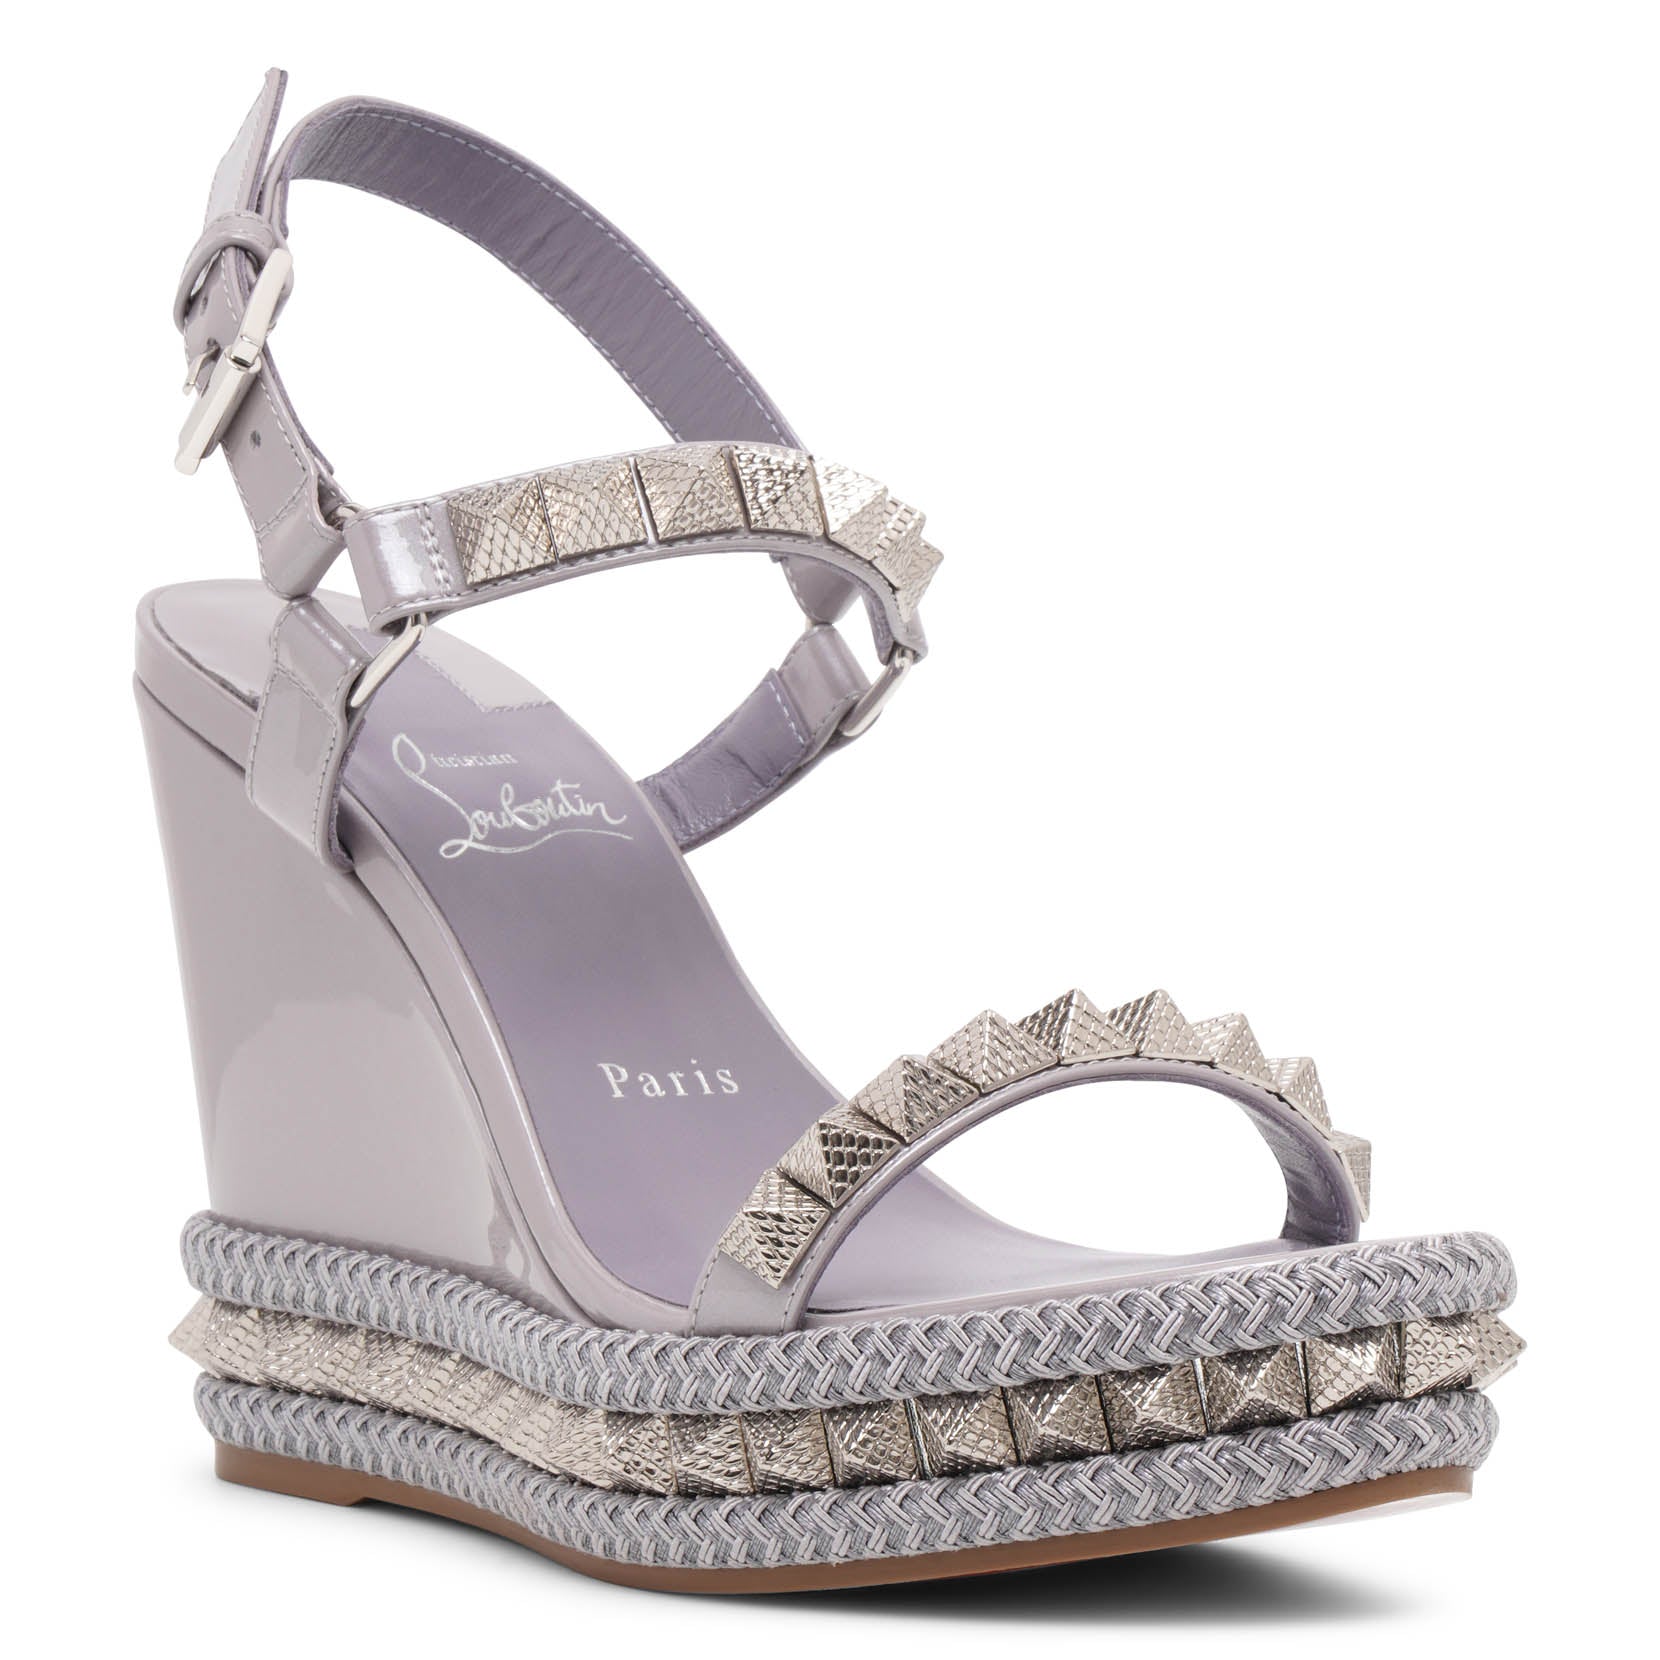 Pyraclou 110 lilac wedges